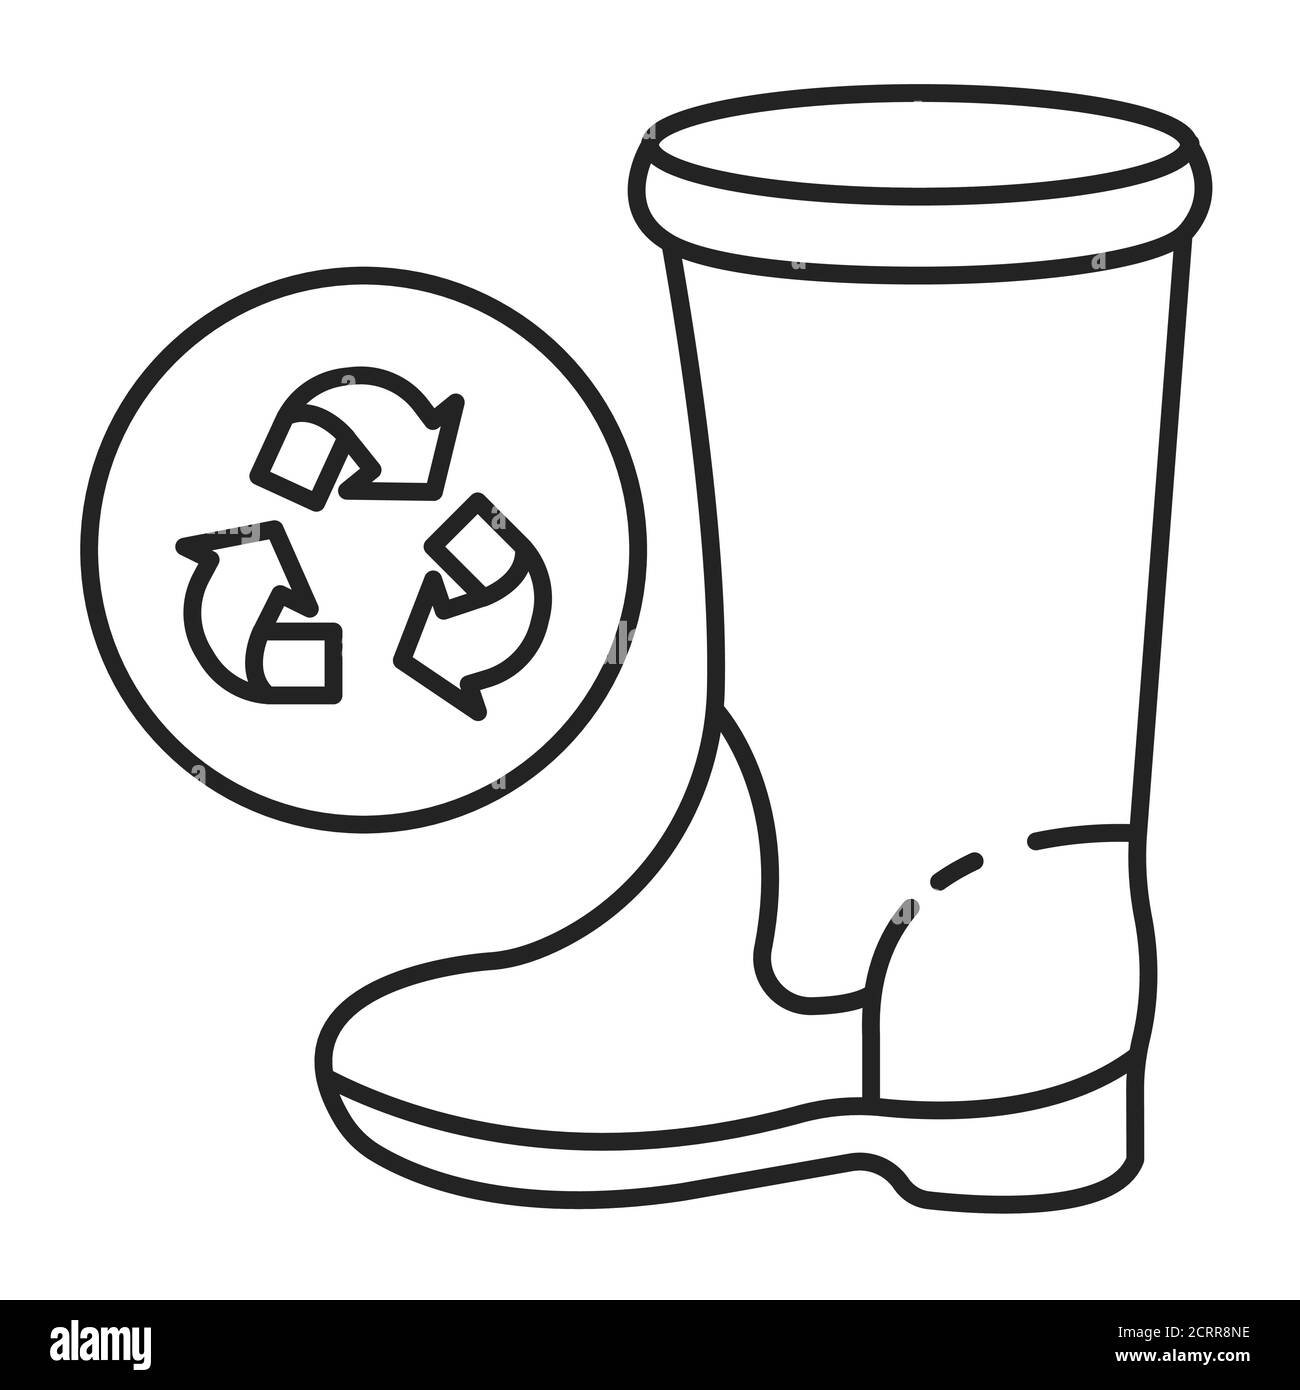 Synthetic waste recycling black line icon. Synthetic fibers that has been manufactured from materials recovered from the waste stream. Pictogram for Stock Vector